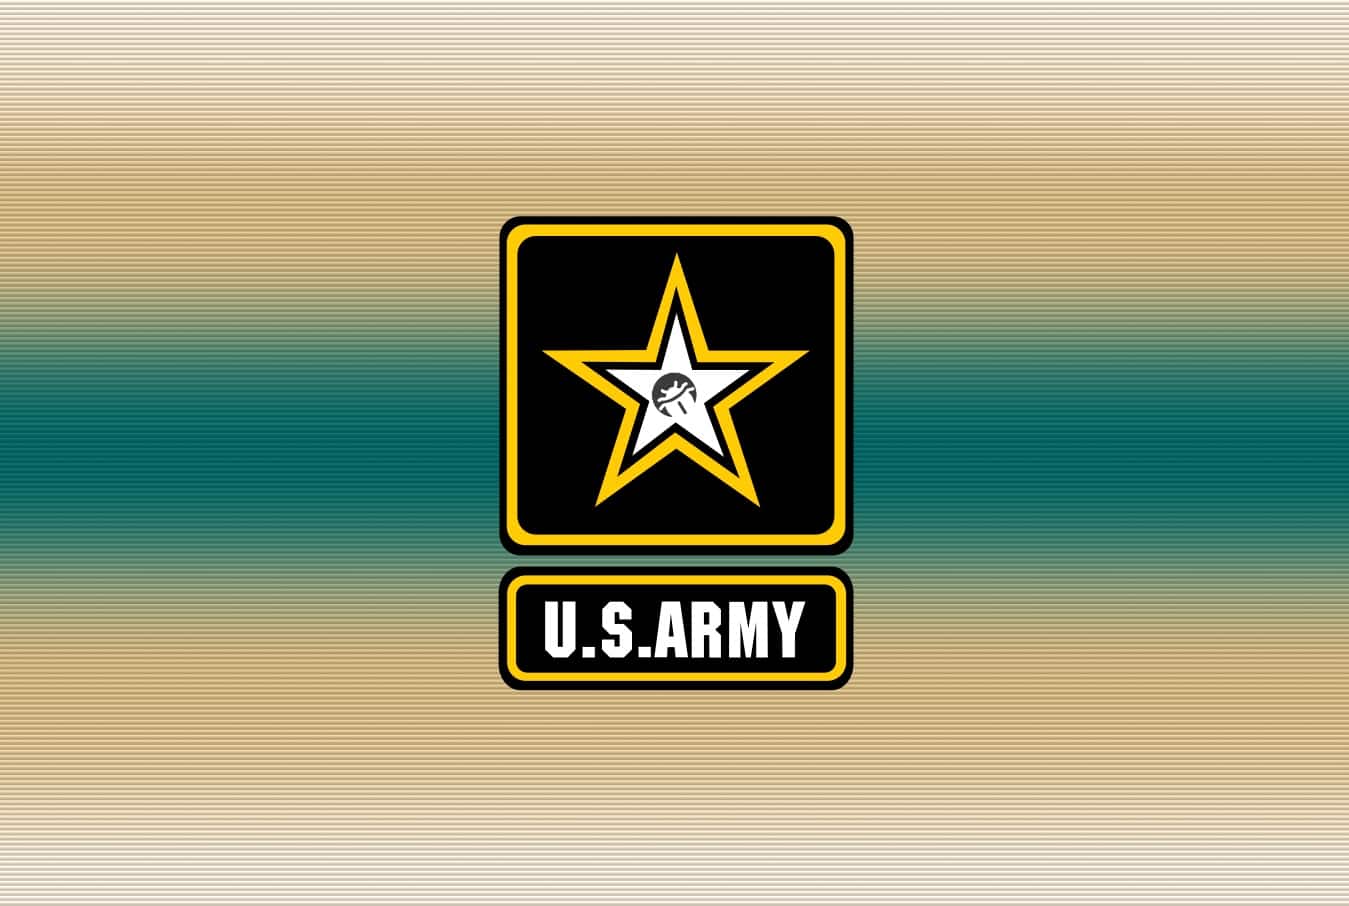 Hack the US Army for good with 'Hack The Army' bug bounty program